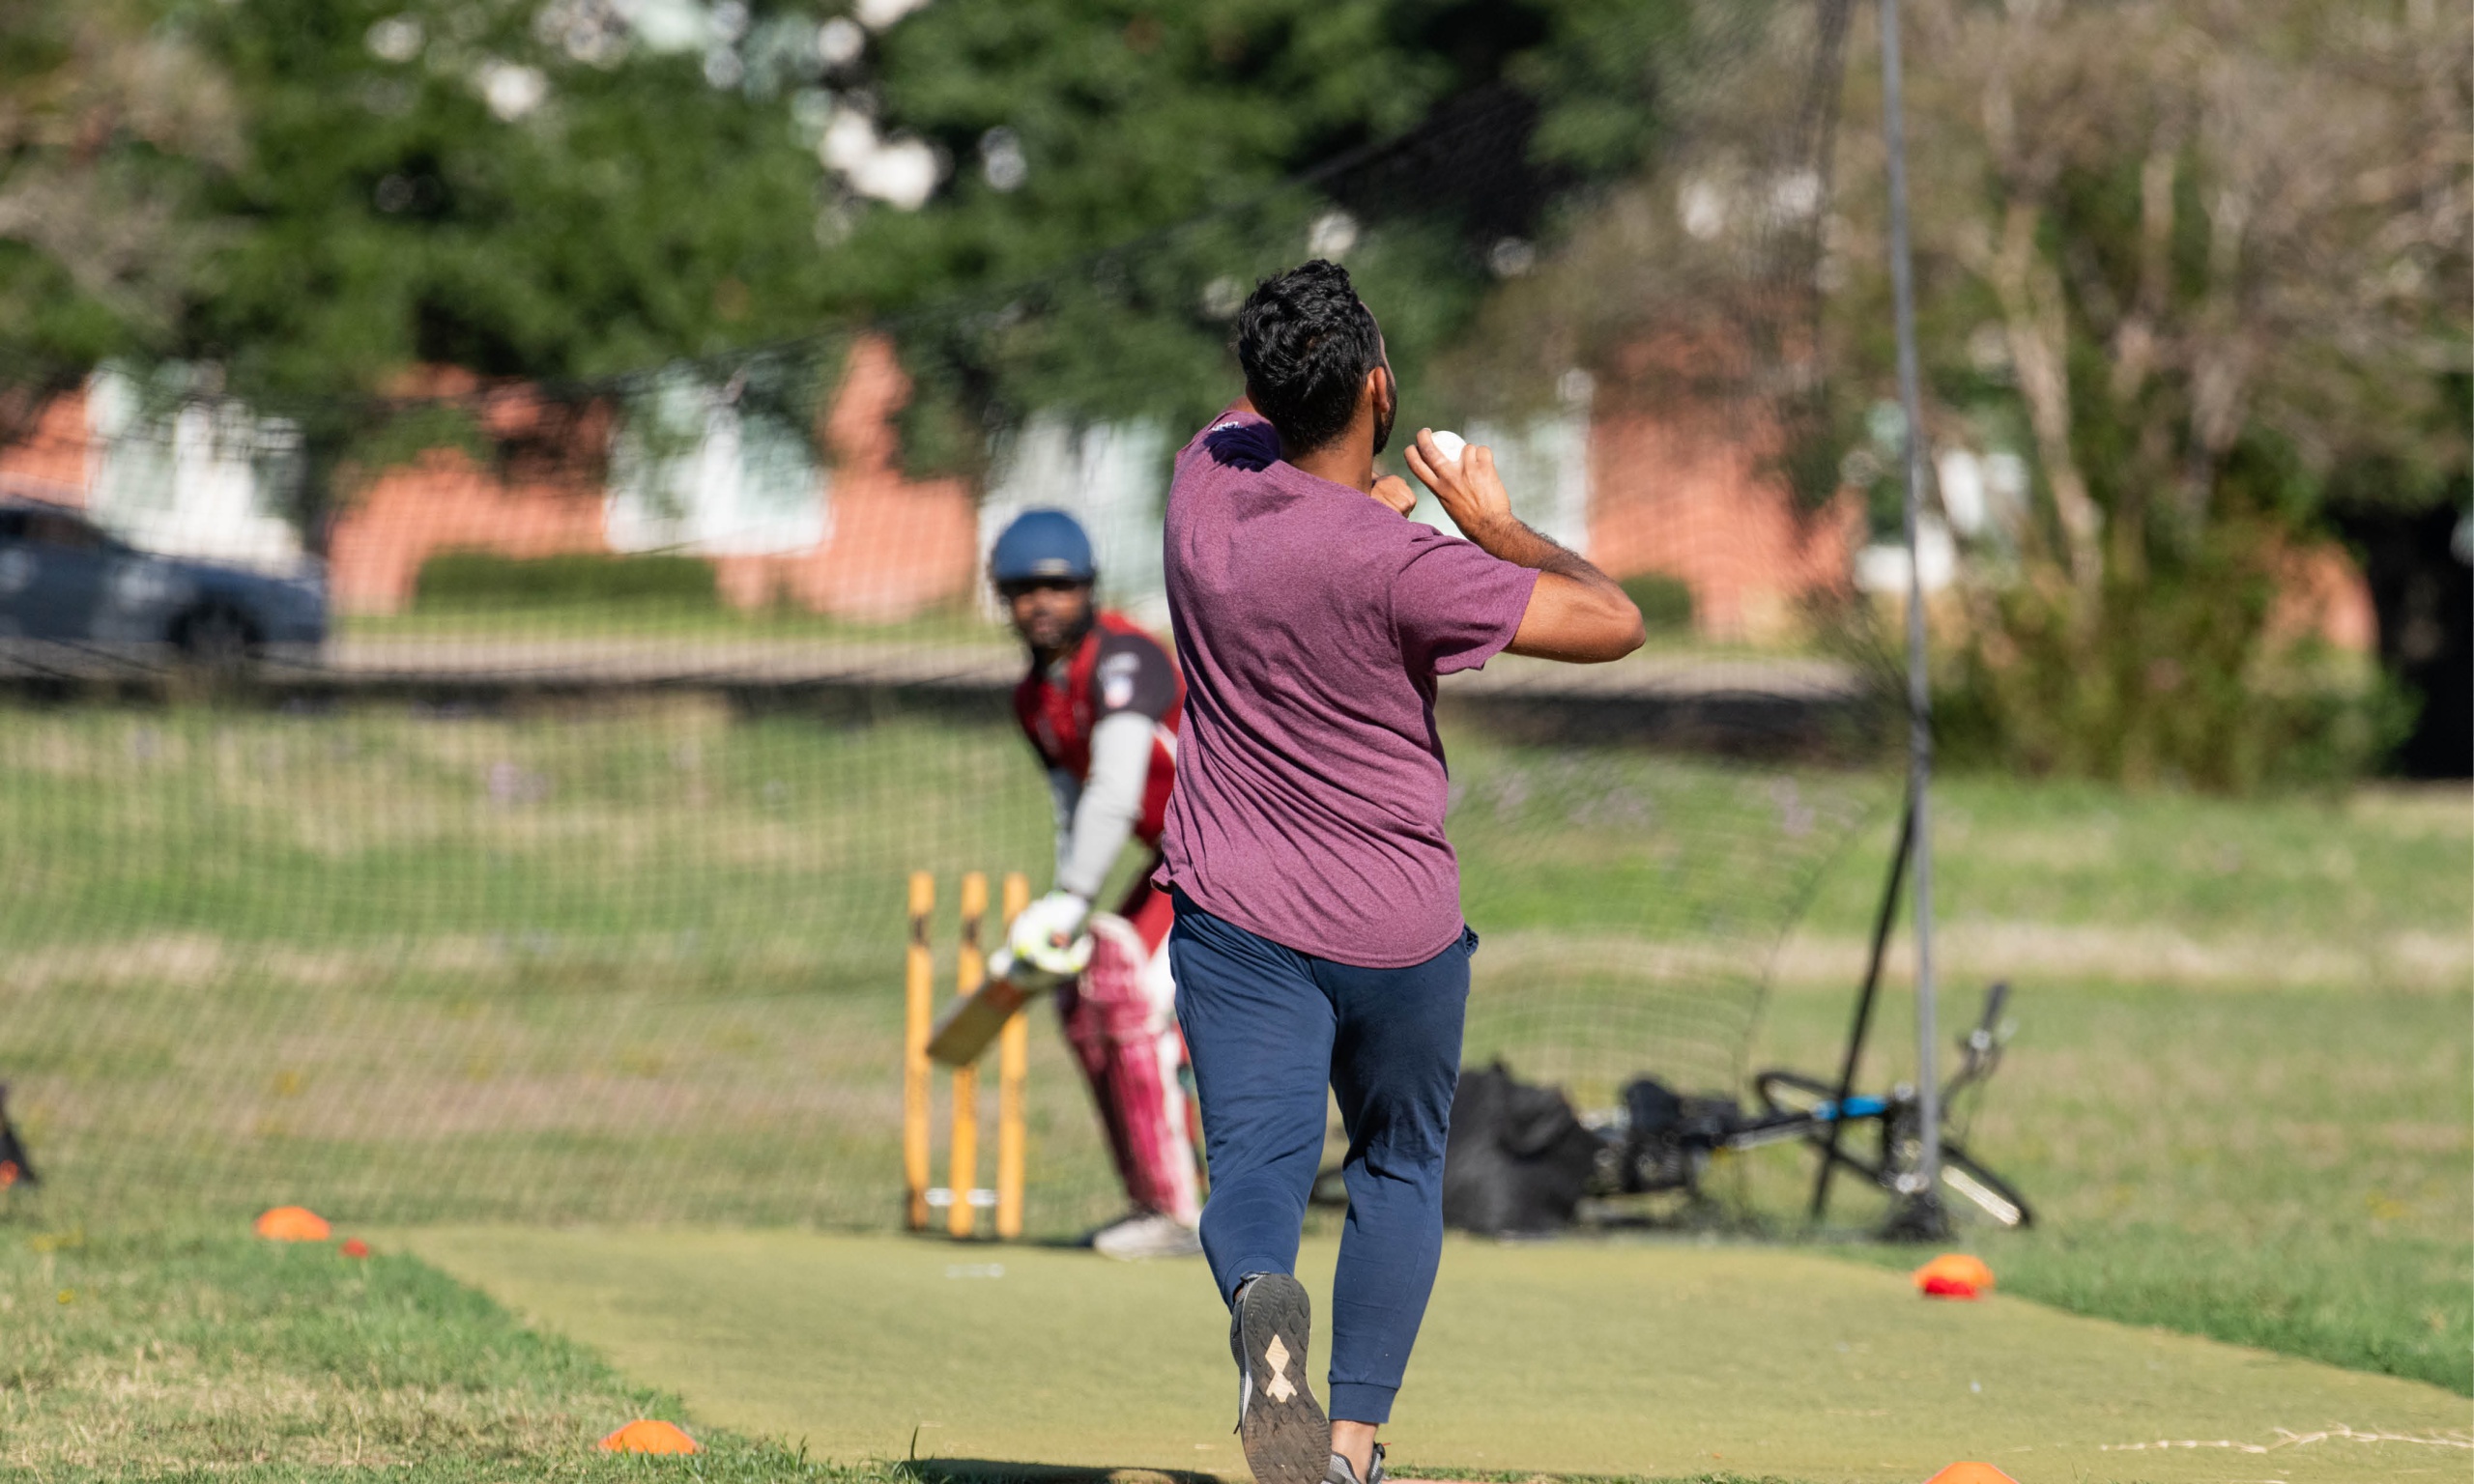 A man engaged in a game of cricket on a field, showcasing his skills and passion for the sport.